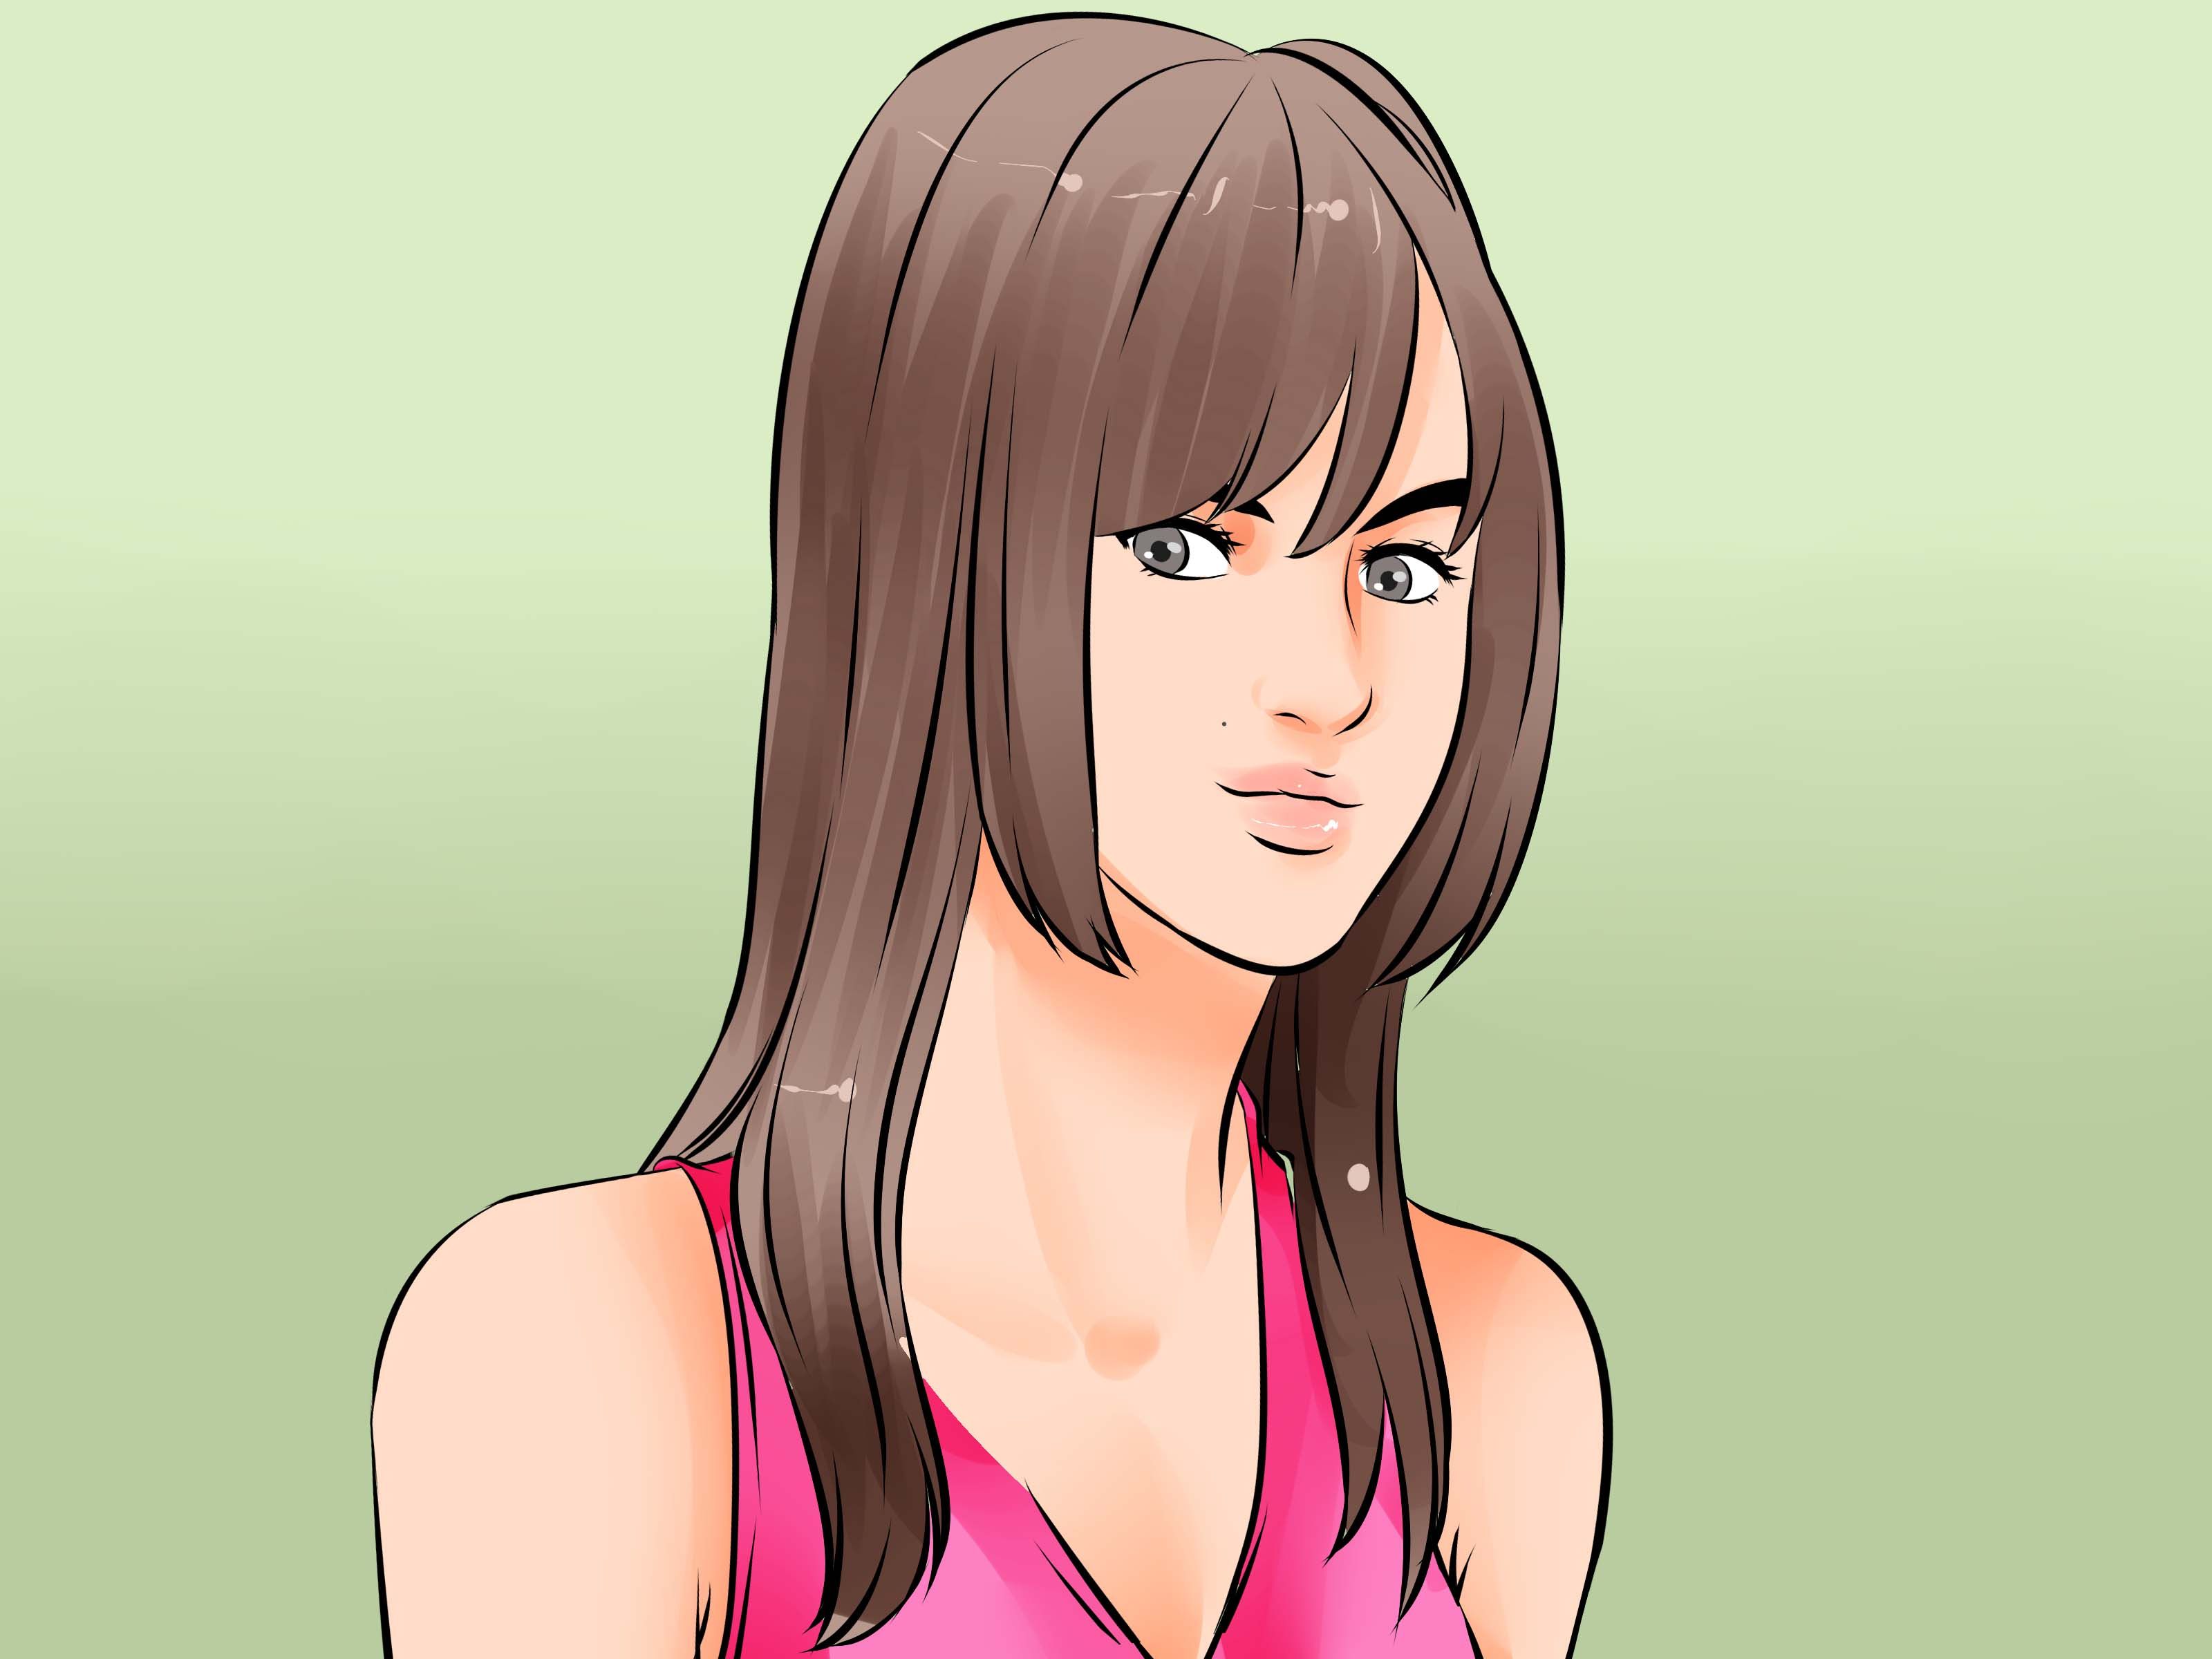 Latest Medium Hairstyles For Large Noses Regarding How To Hide Big Ears: 10 Steps (with Pictures) – Wikihow (View 20 of 20)